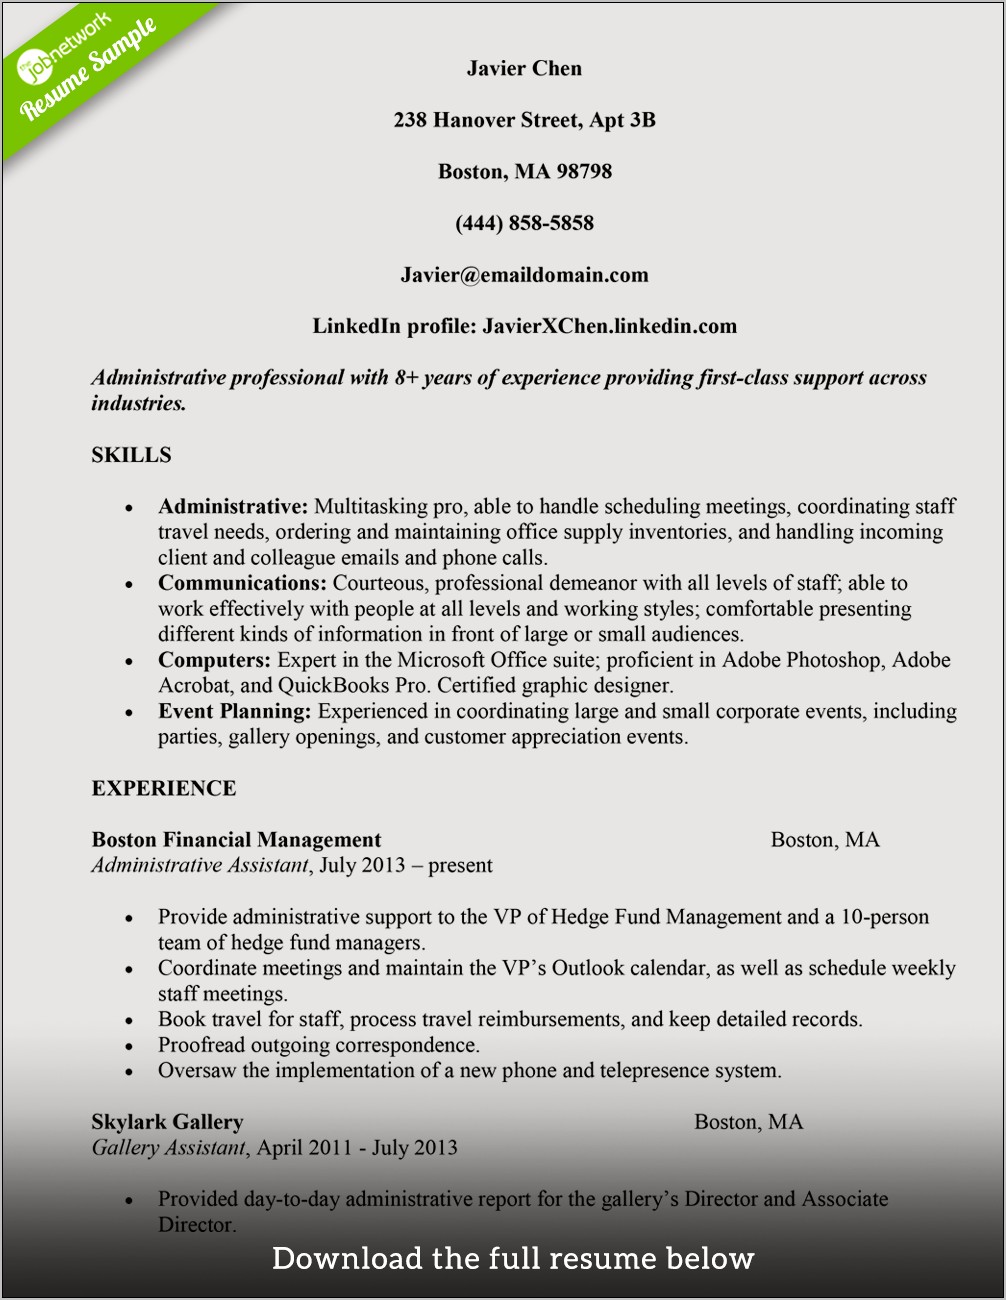 Sample Resumes For Administrative Assistant Positions